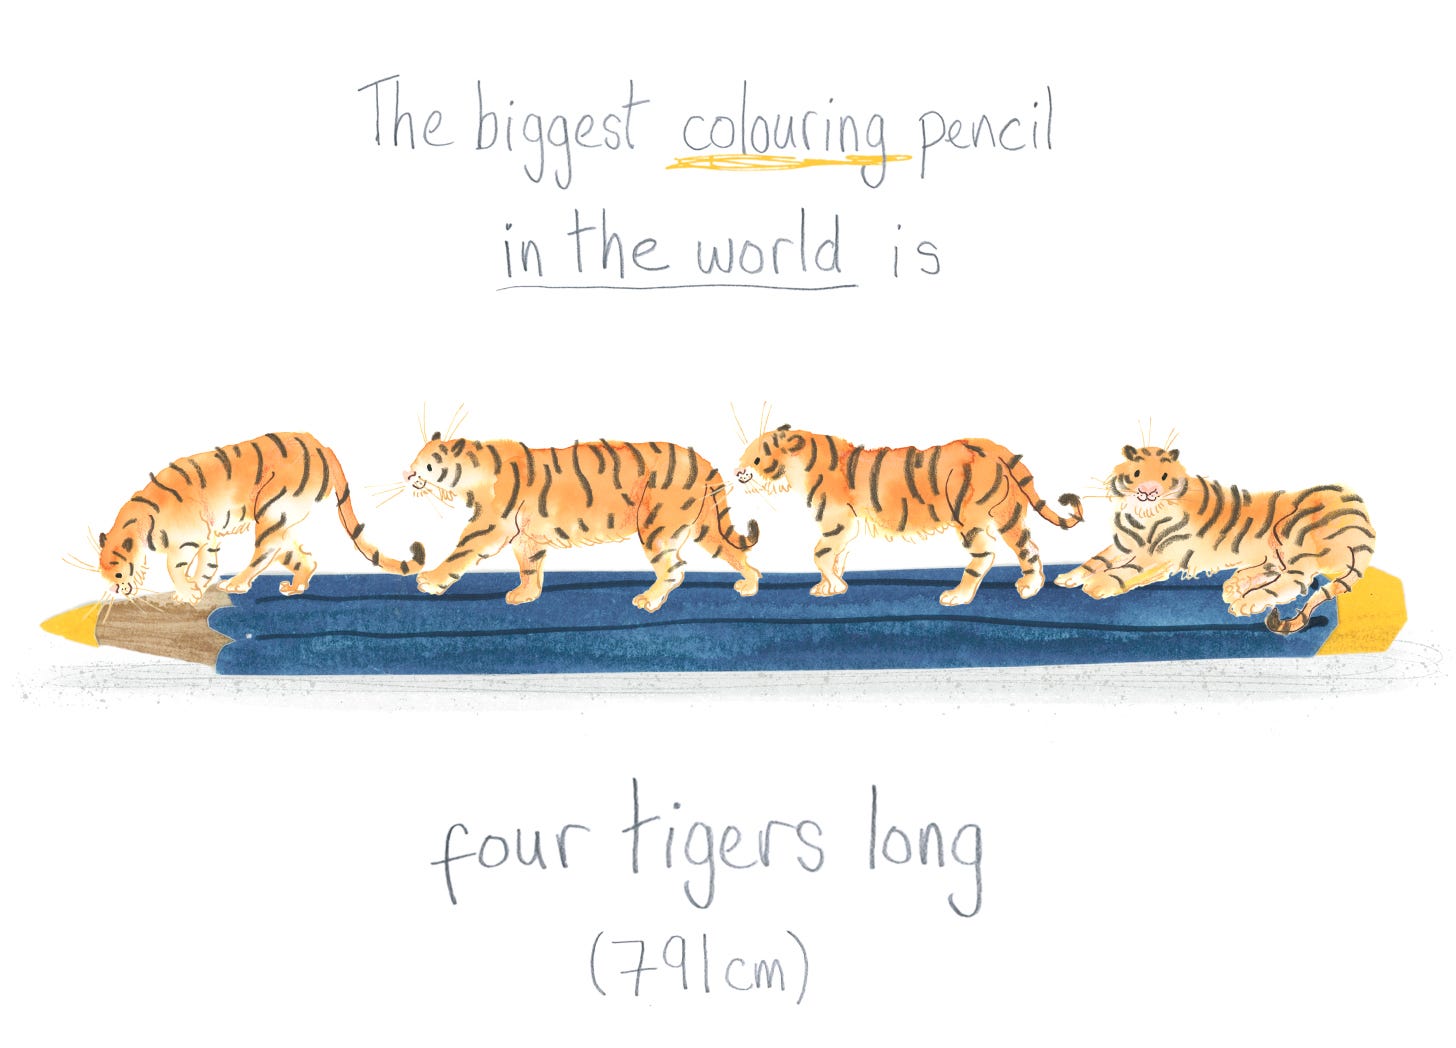 Illustration by Nanette Regan of four tigers on top of a dark blue pencil with yellow tip and end. Handwritten text reads: The biggest colouring pencil in the world is four tigers long (791cm)